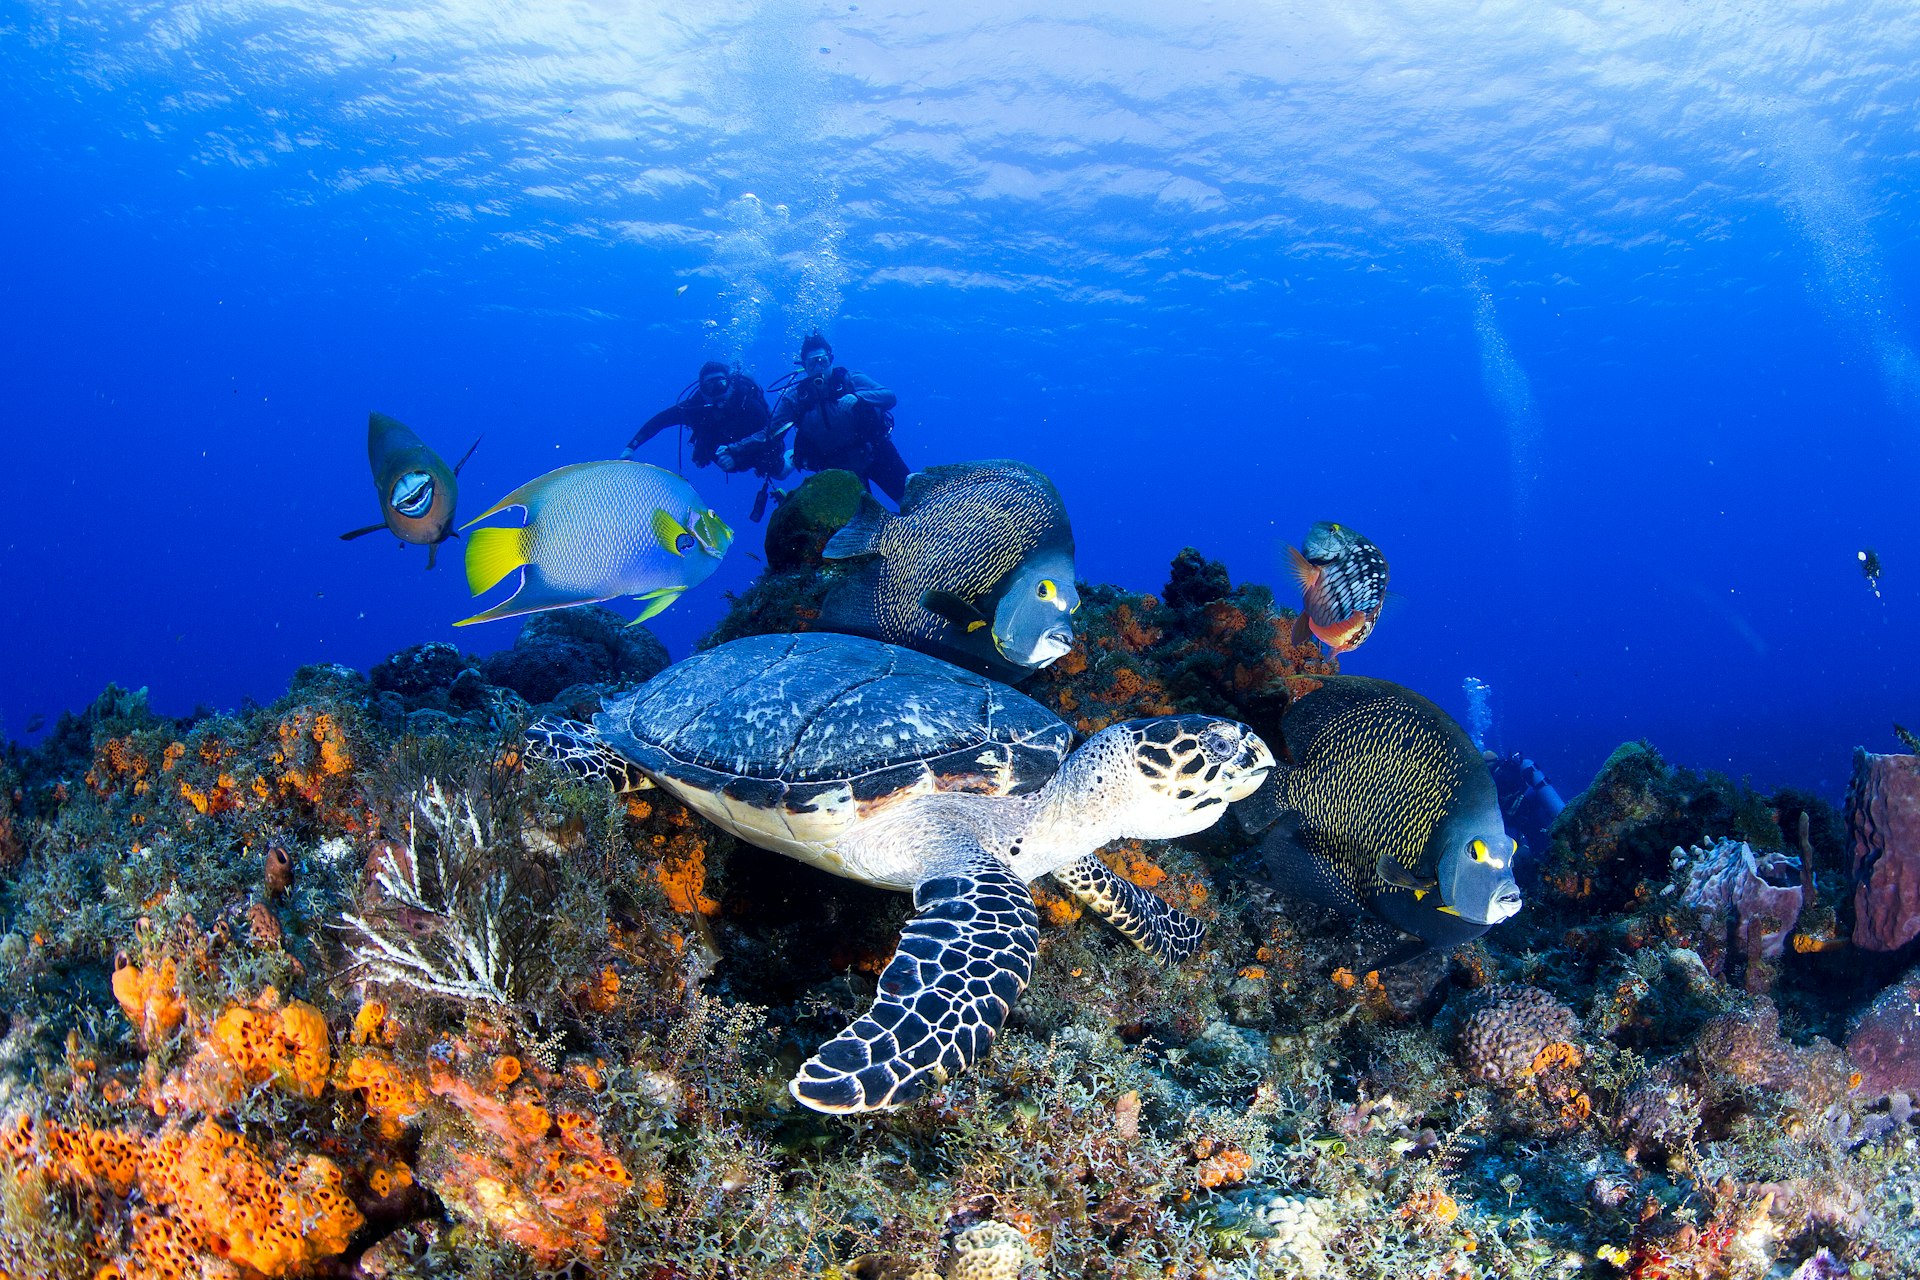 Underwater shot of a turtle swimming with angel fish near coral. Two divers are rising over the reef